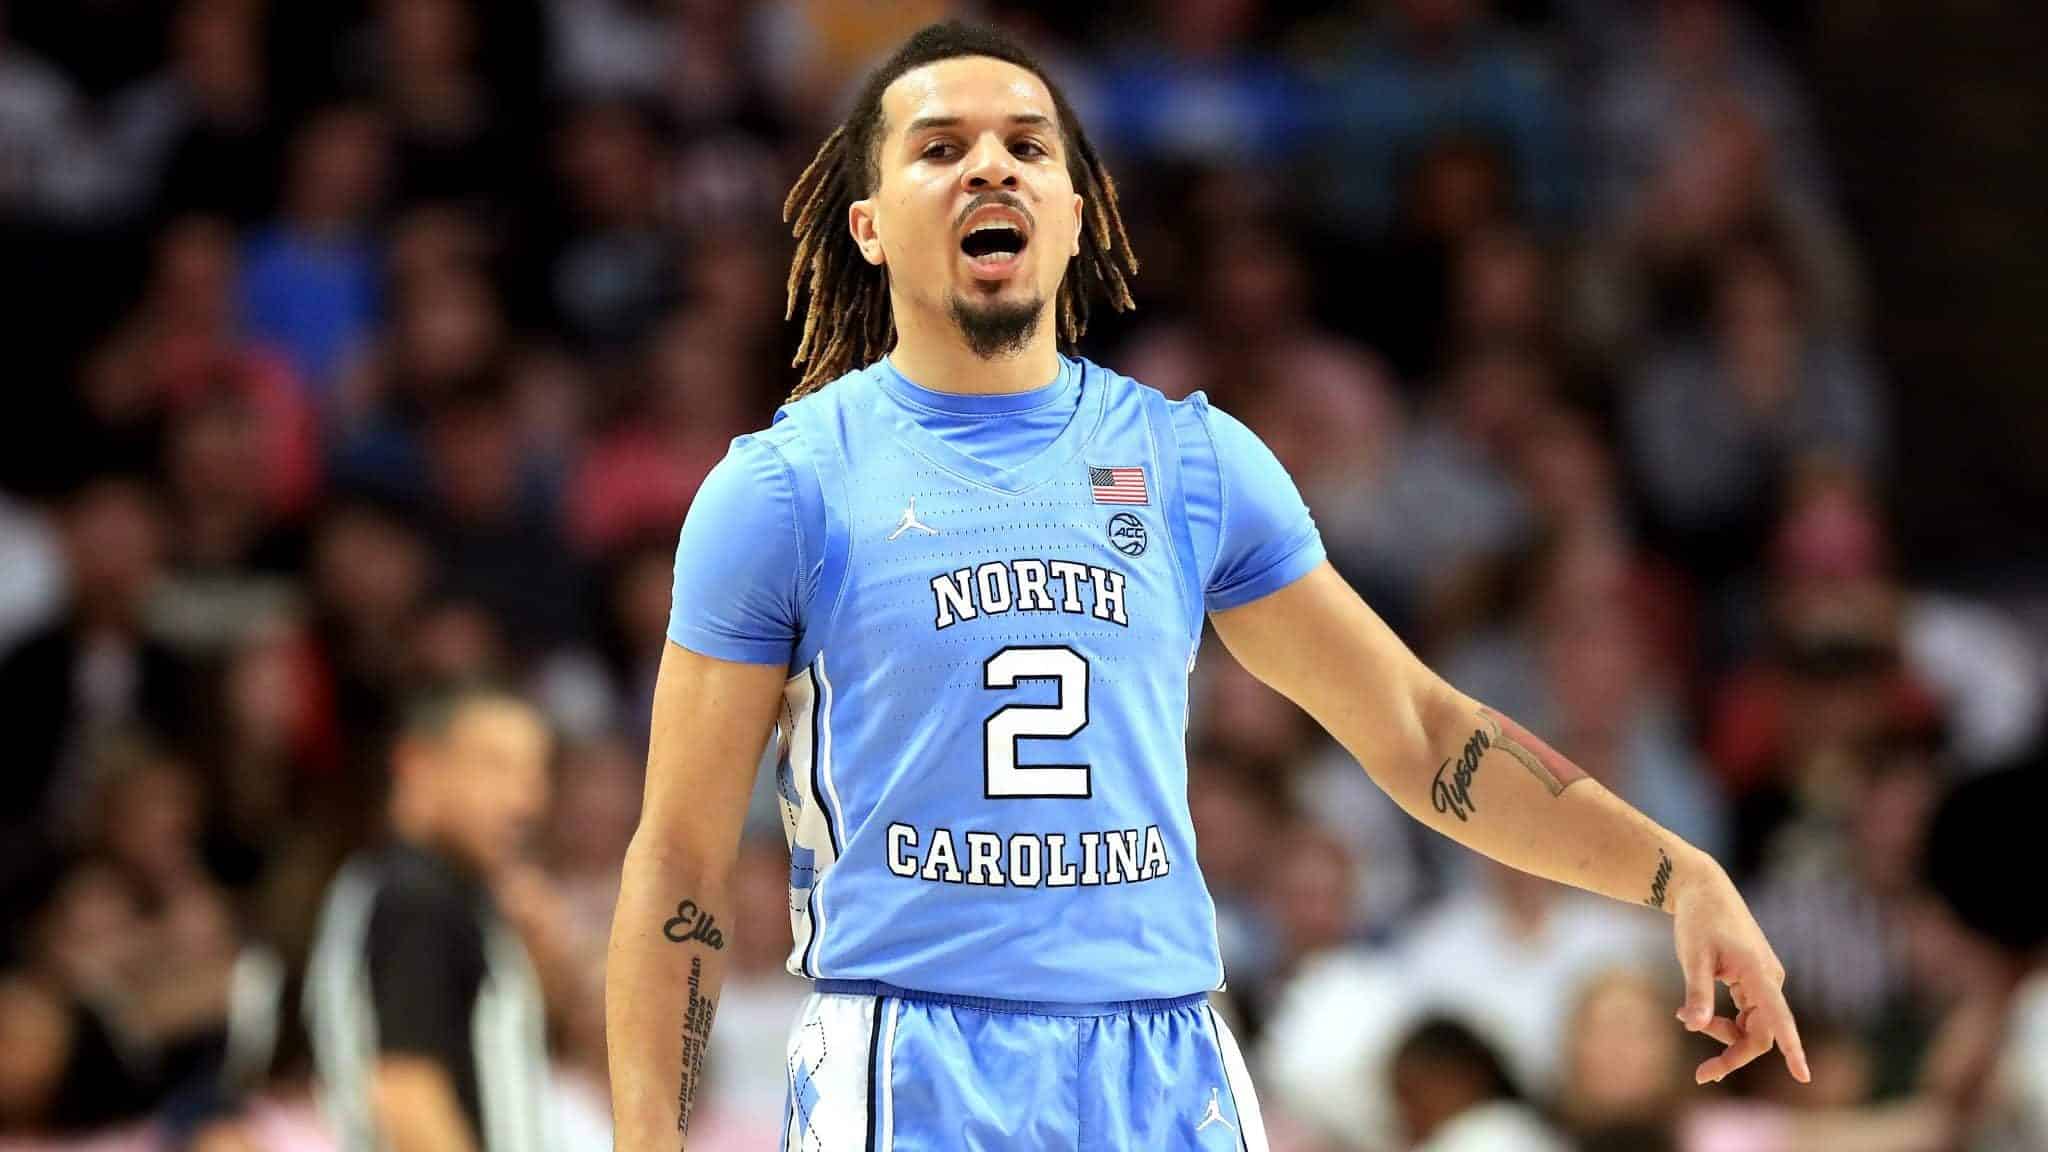 WINSTON-SALEM, NORTH CAROLINA - FEBRUARY 11: Cole Anthony #2 of the North Carolina Tar Heels reacts after a play against the Wake Forest Demon Deacons during their game at LJVM Coliseum Complex on February 11, 2020 in Winston-Salem, North Carolina.